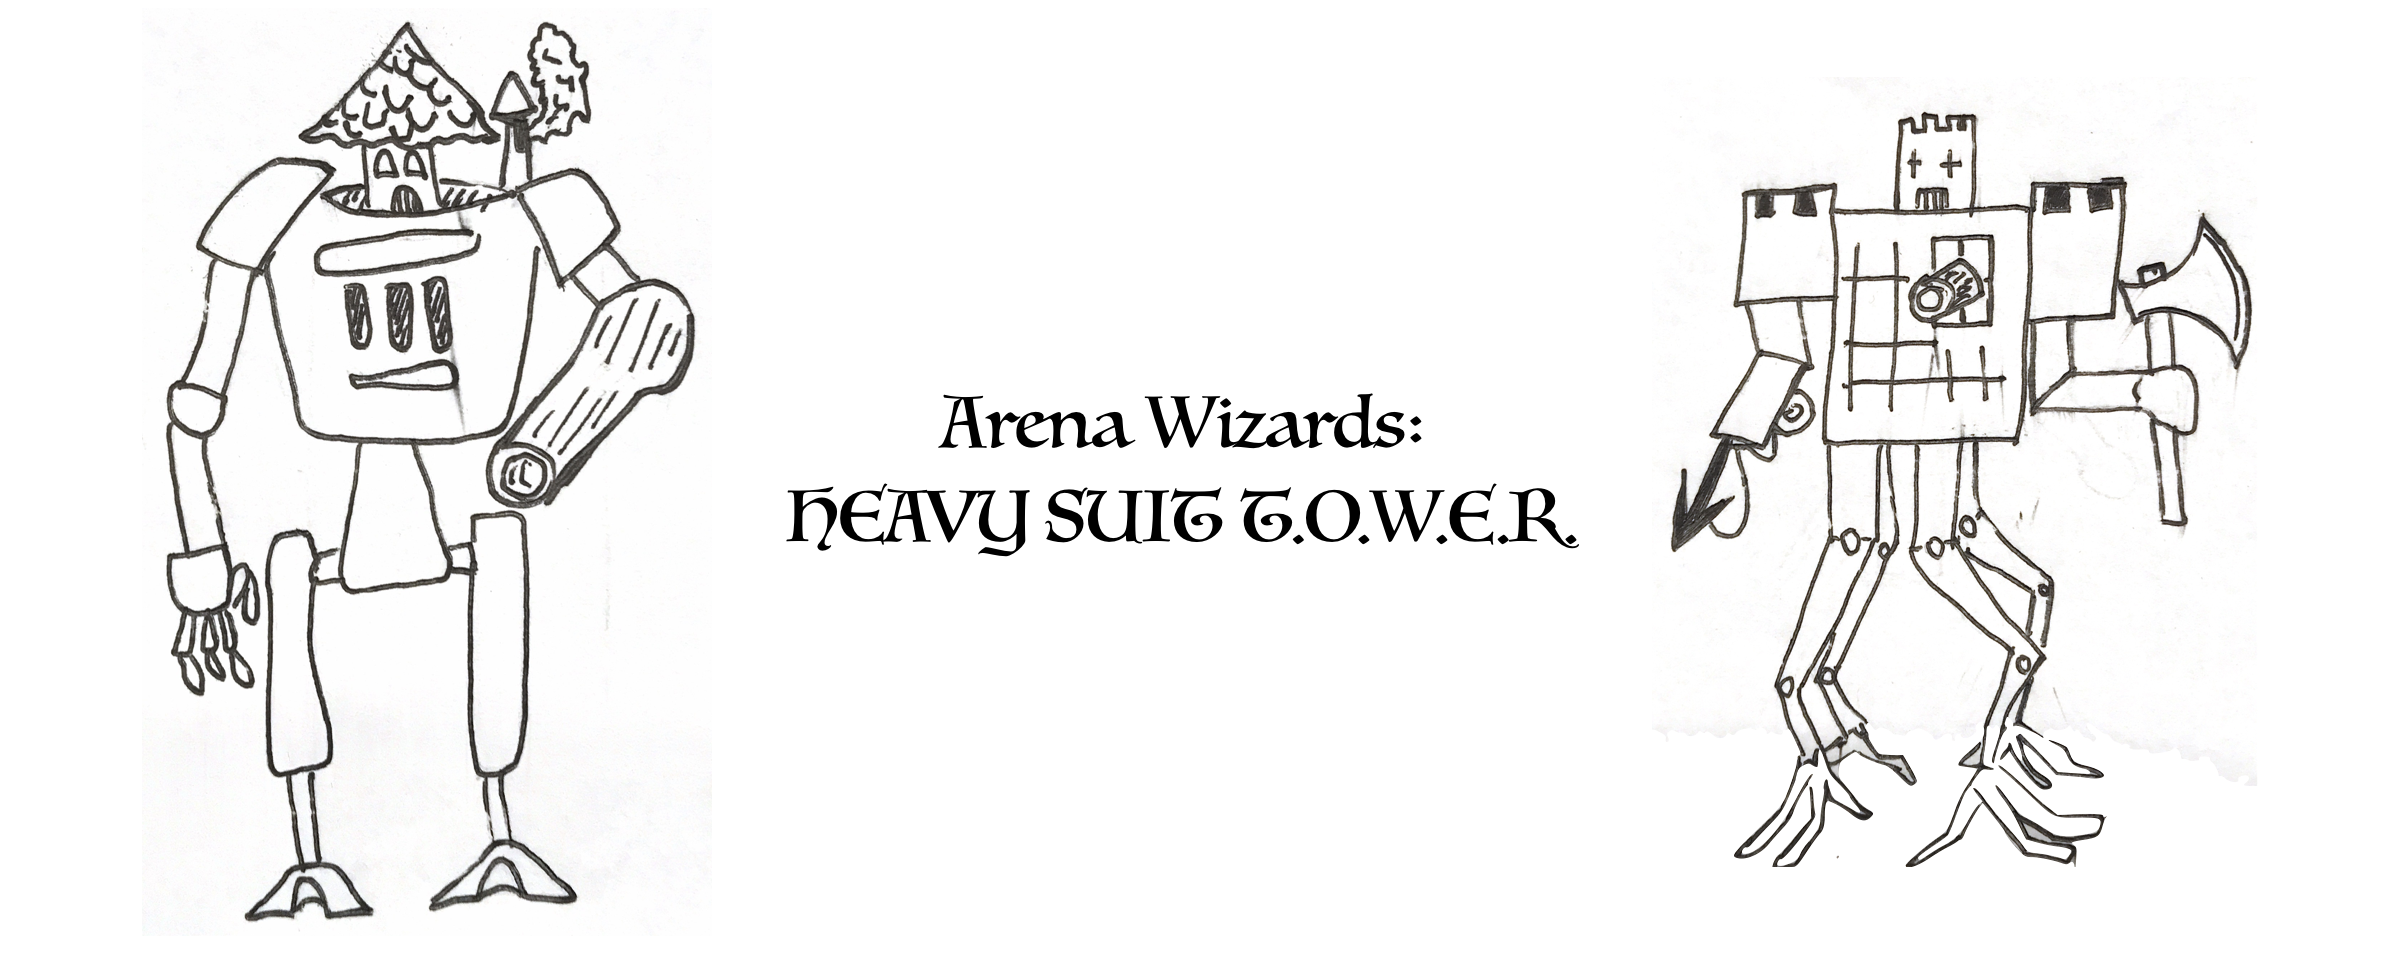 Arena Wizards: HEAVY SUIT T.O.W.E.R.